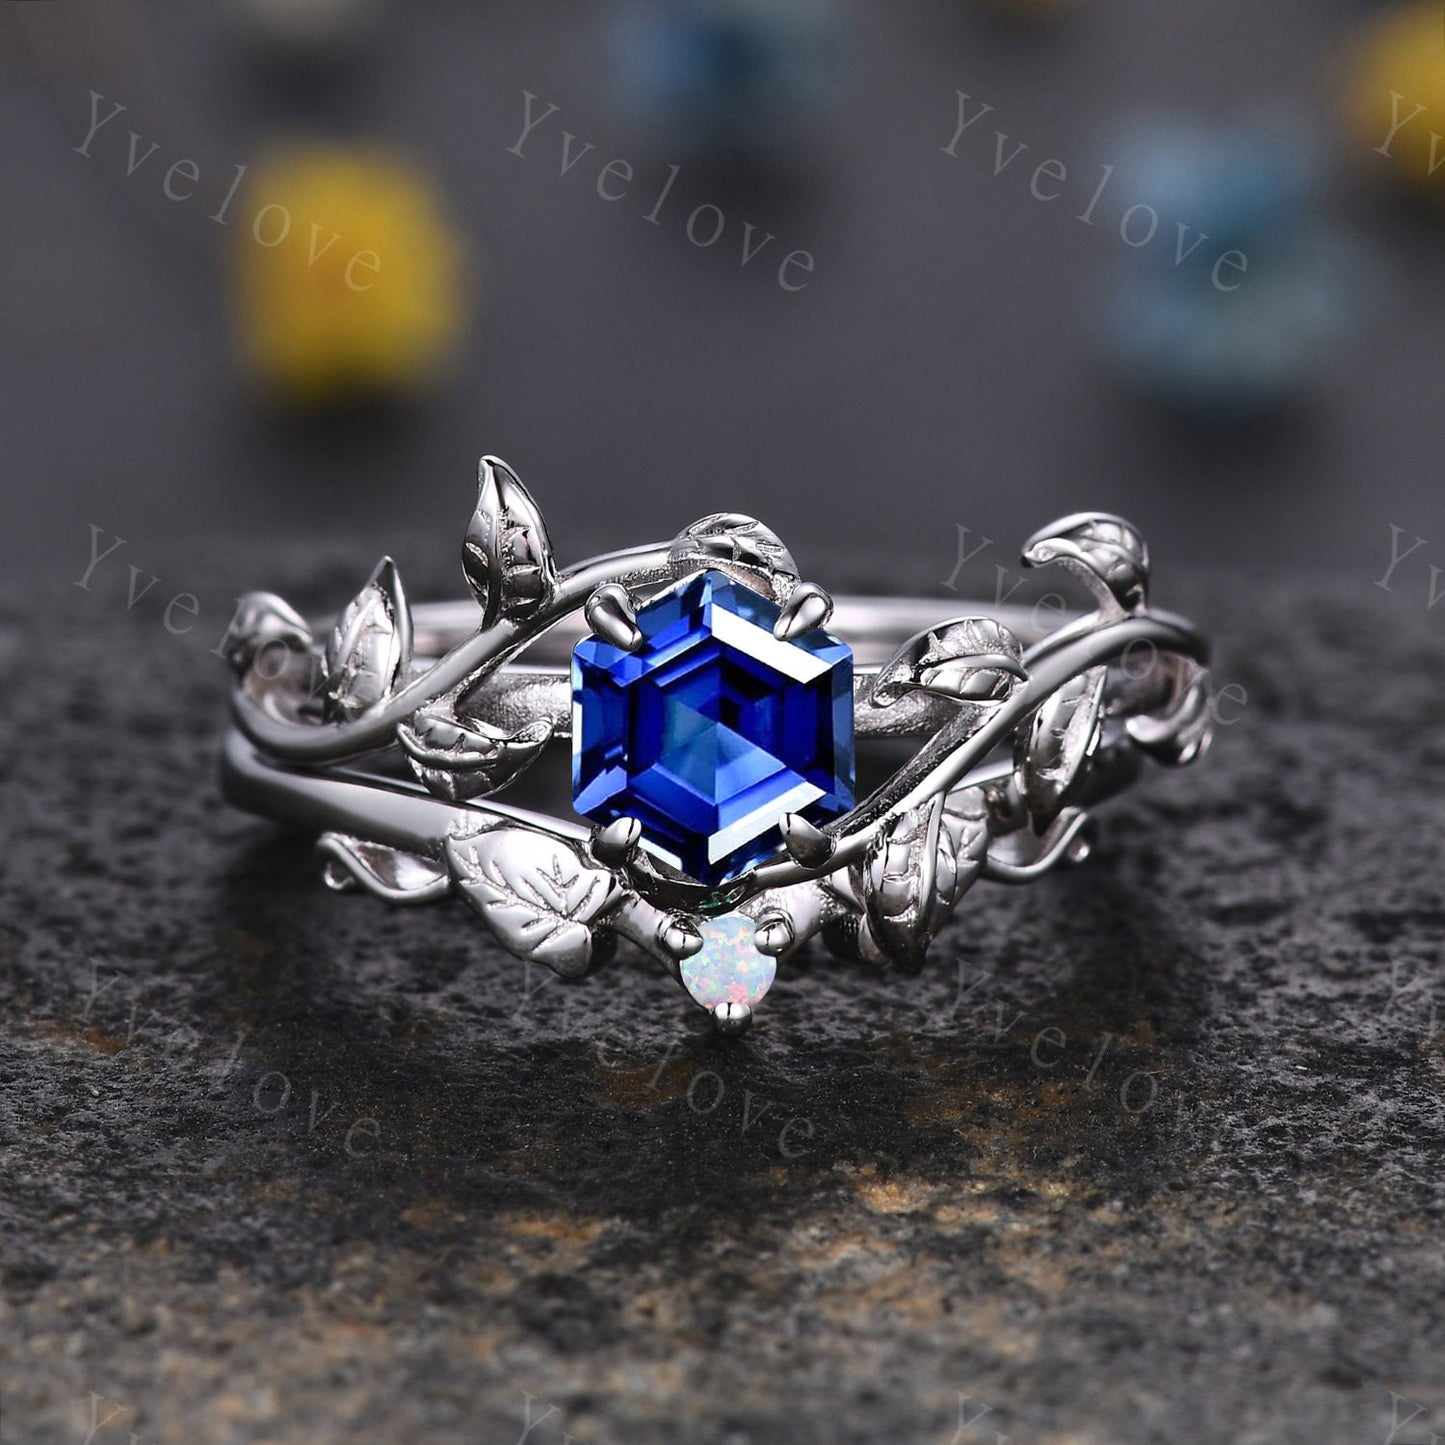 Hexagon Sapphire Ring,Vintage Vine Leaf Ring,Unique Sapphire Opal Engagement Ring,September birthstone,Promise Anniversary Bridal Ring Gift